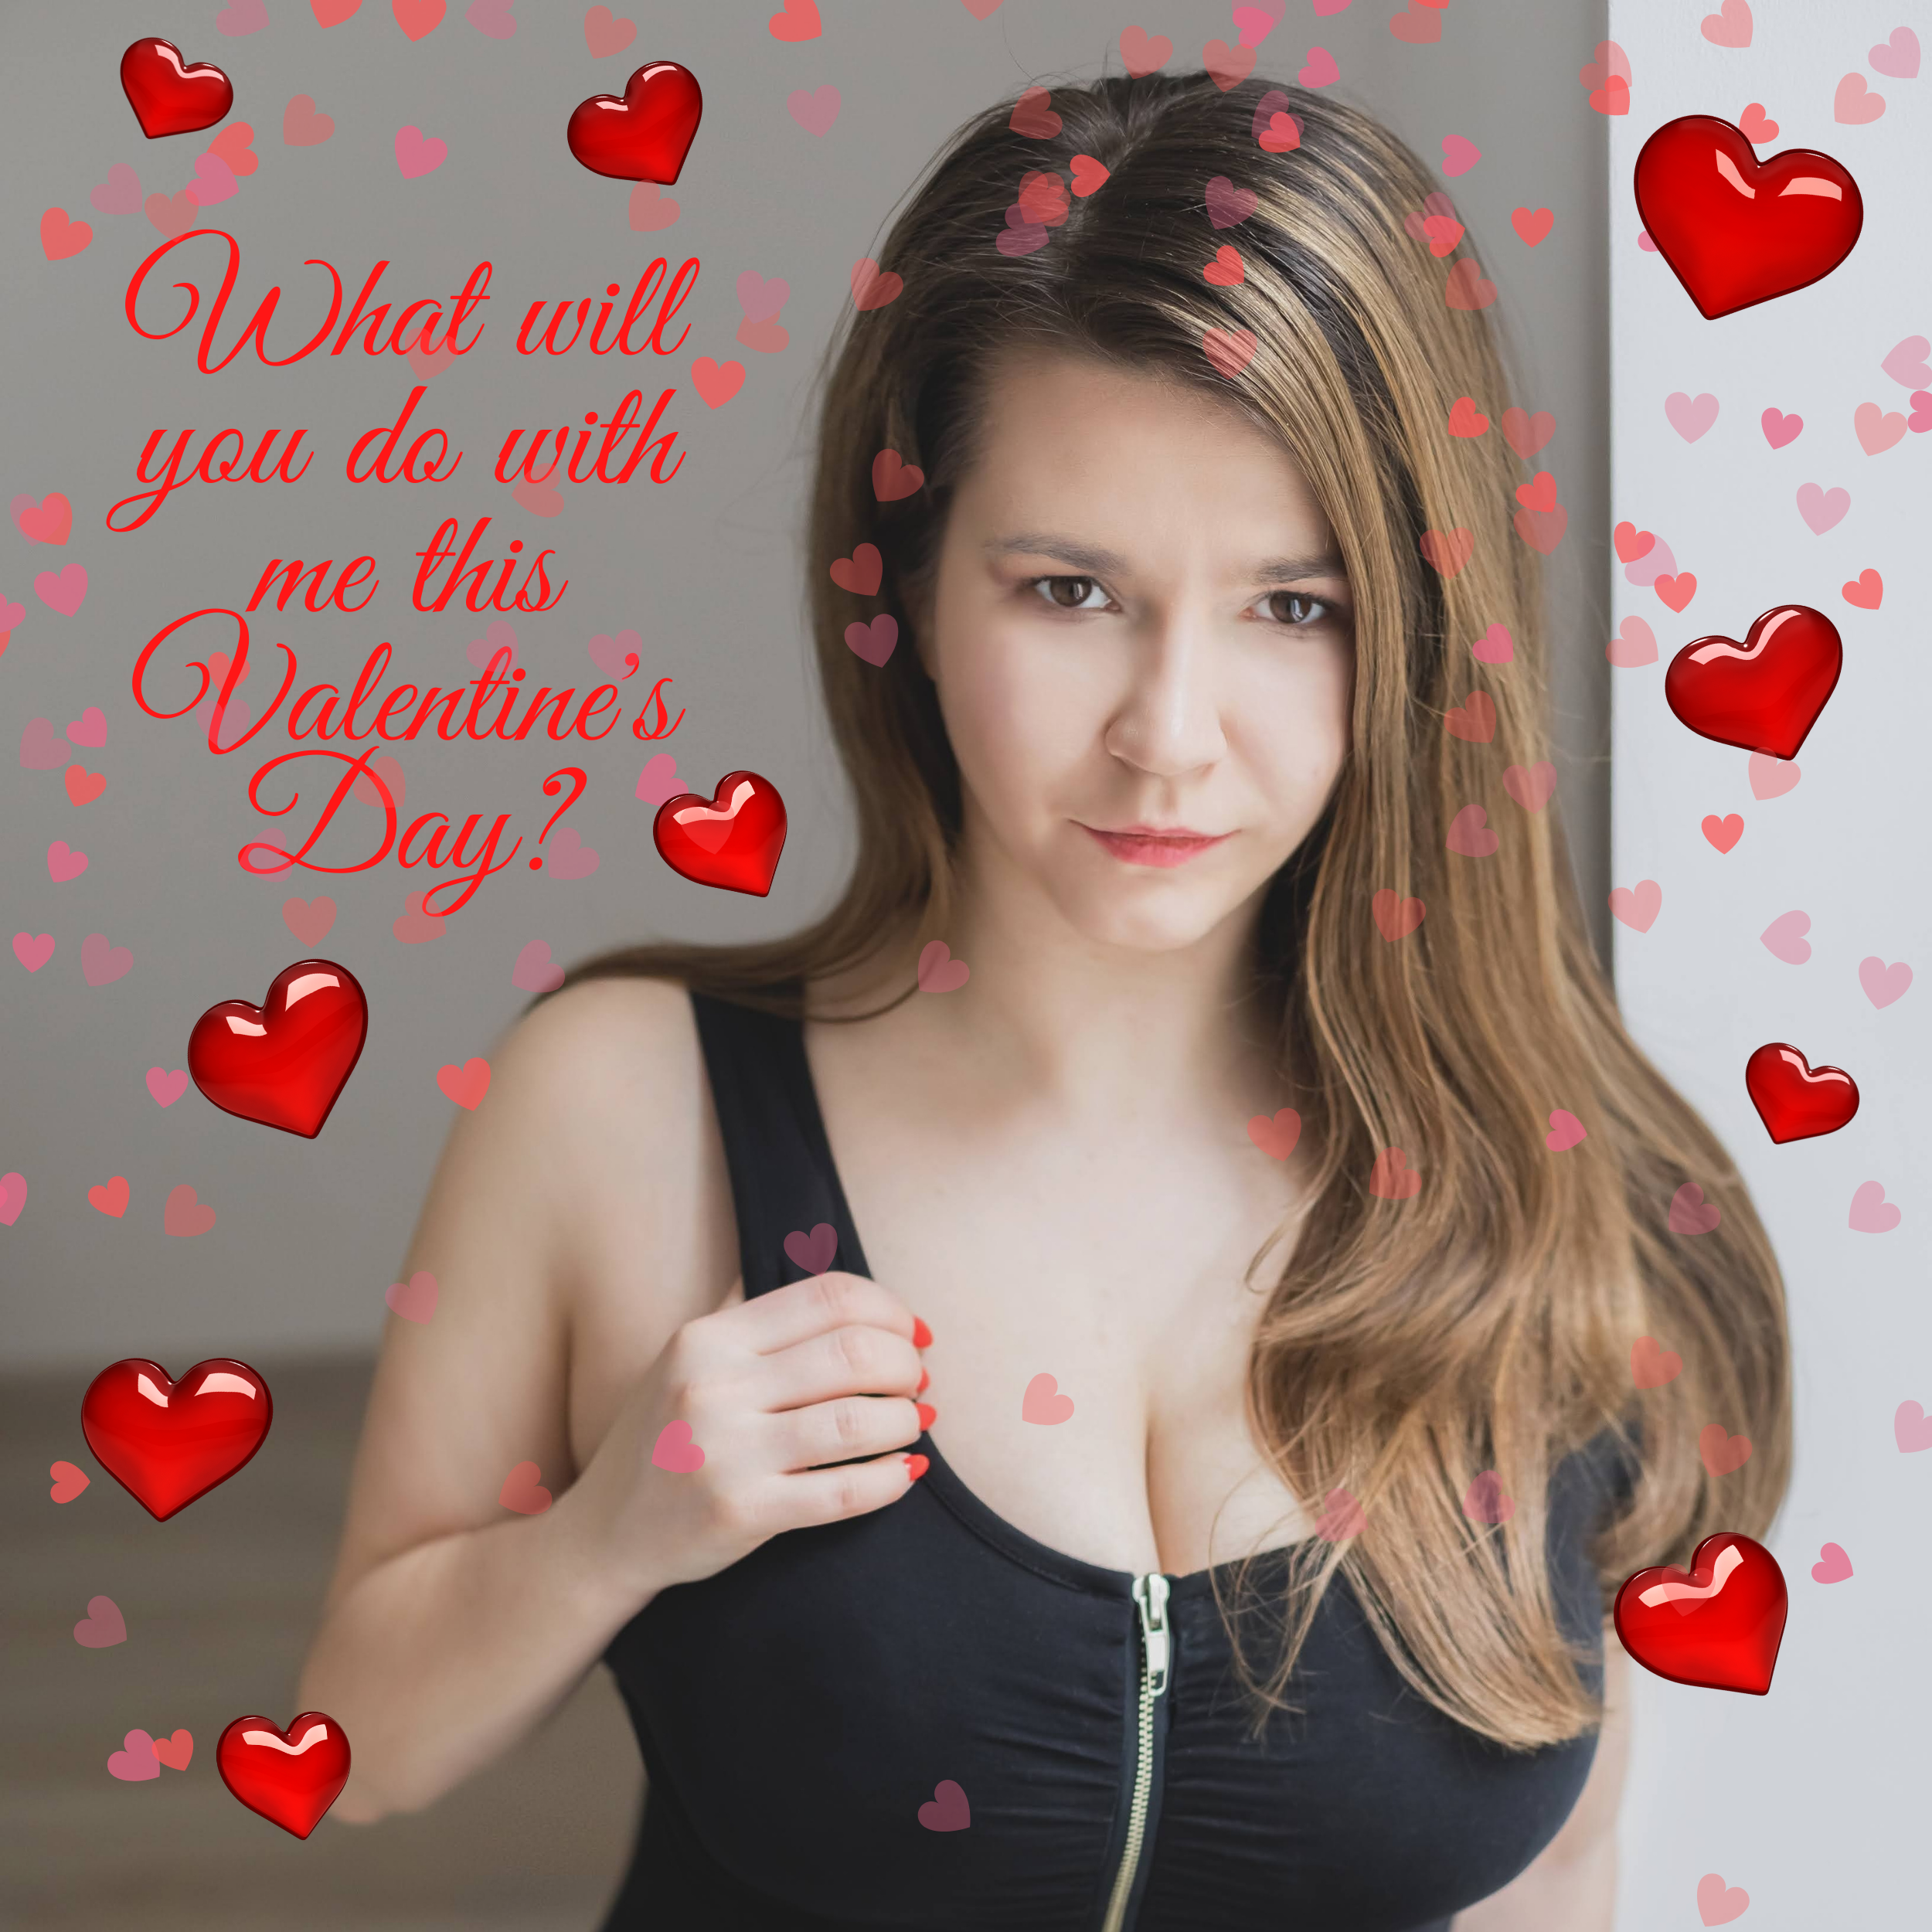 GraceLove What will you do with me this Valentine's Day? image: 1